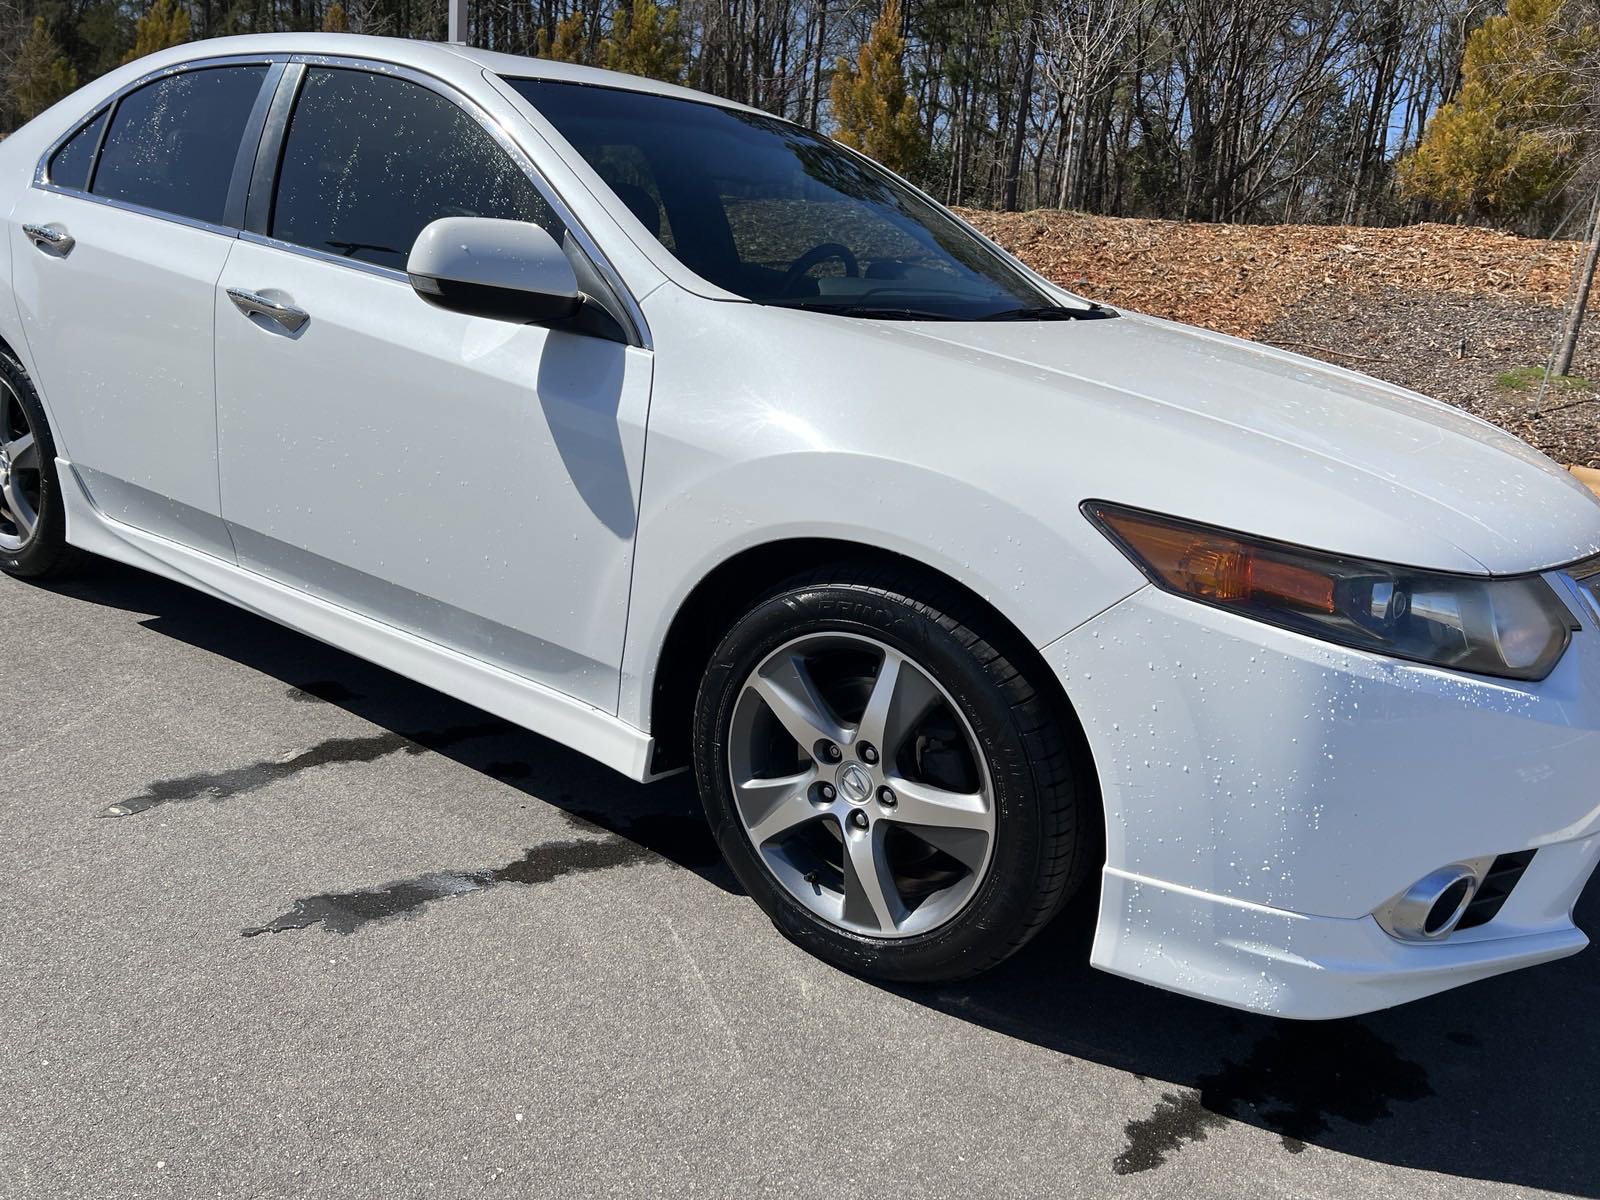 Certified Pre-Owned 2013 Acura TSX Special Edition Sedan in Cary #N0887B |  Hendrick Dodge Cary